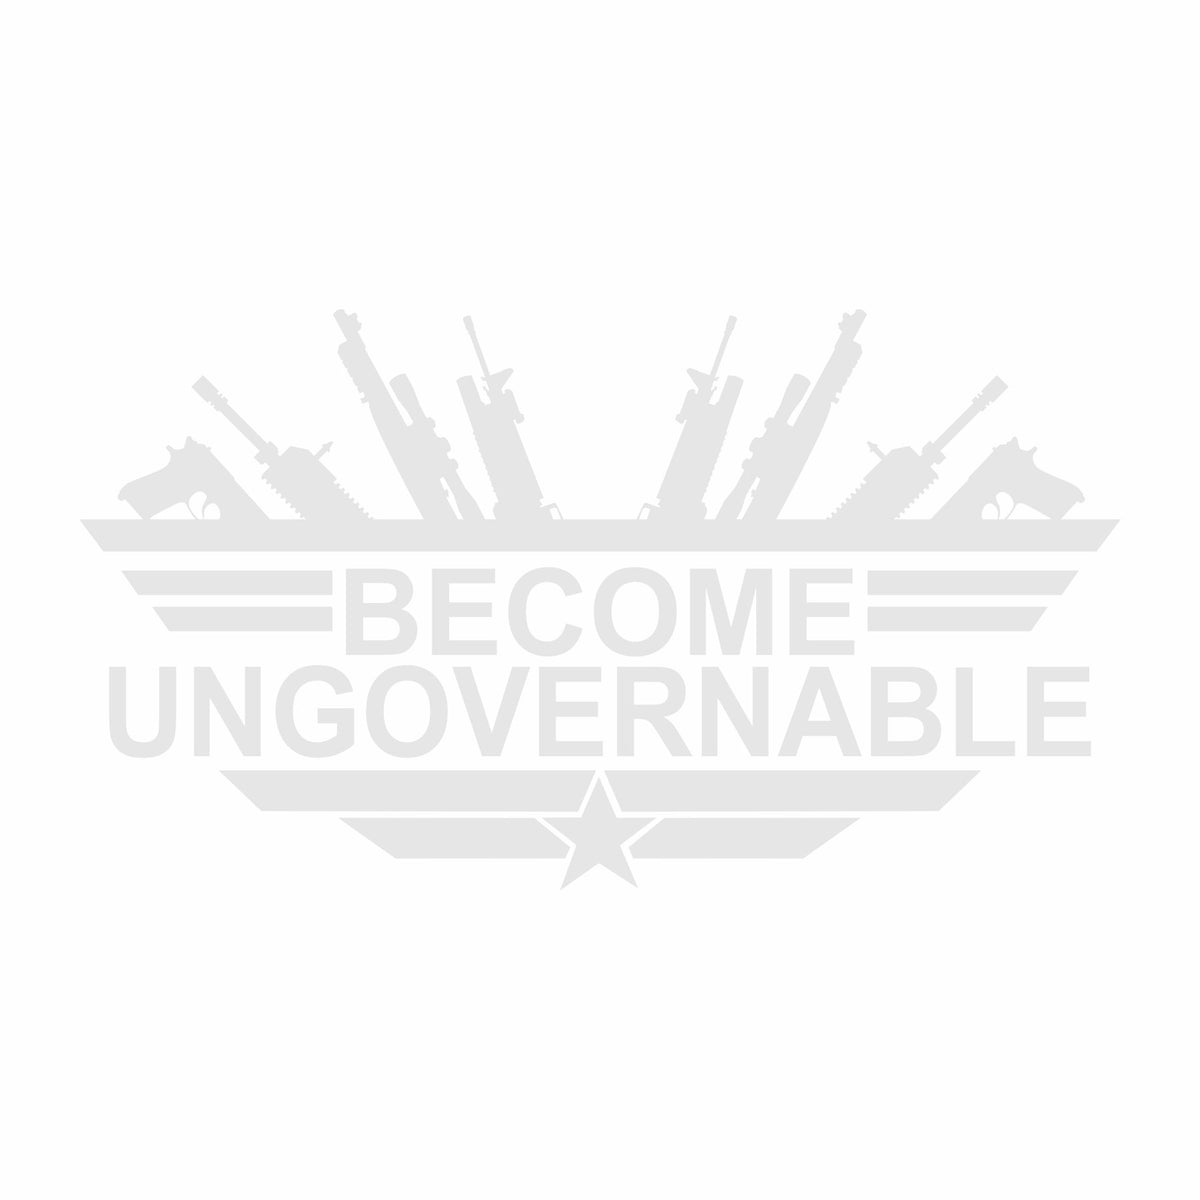 Become Ungovernable - Vinyl Decal - Free Shipping